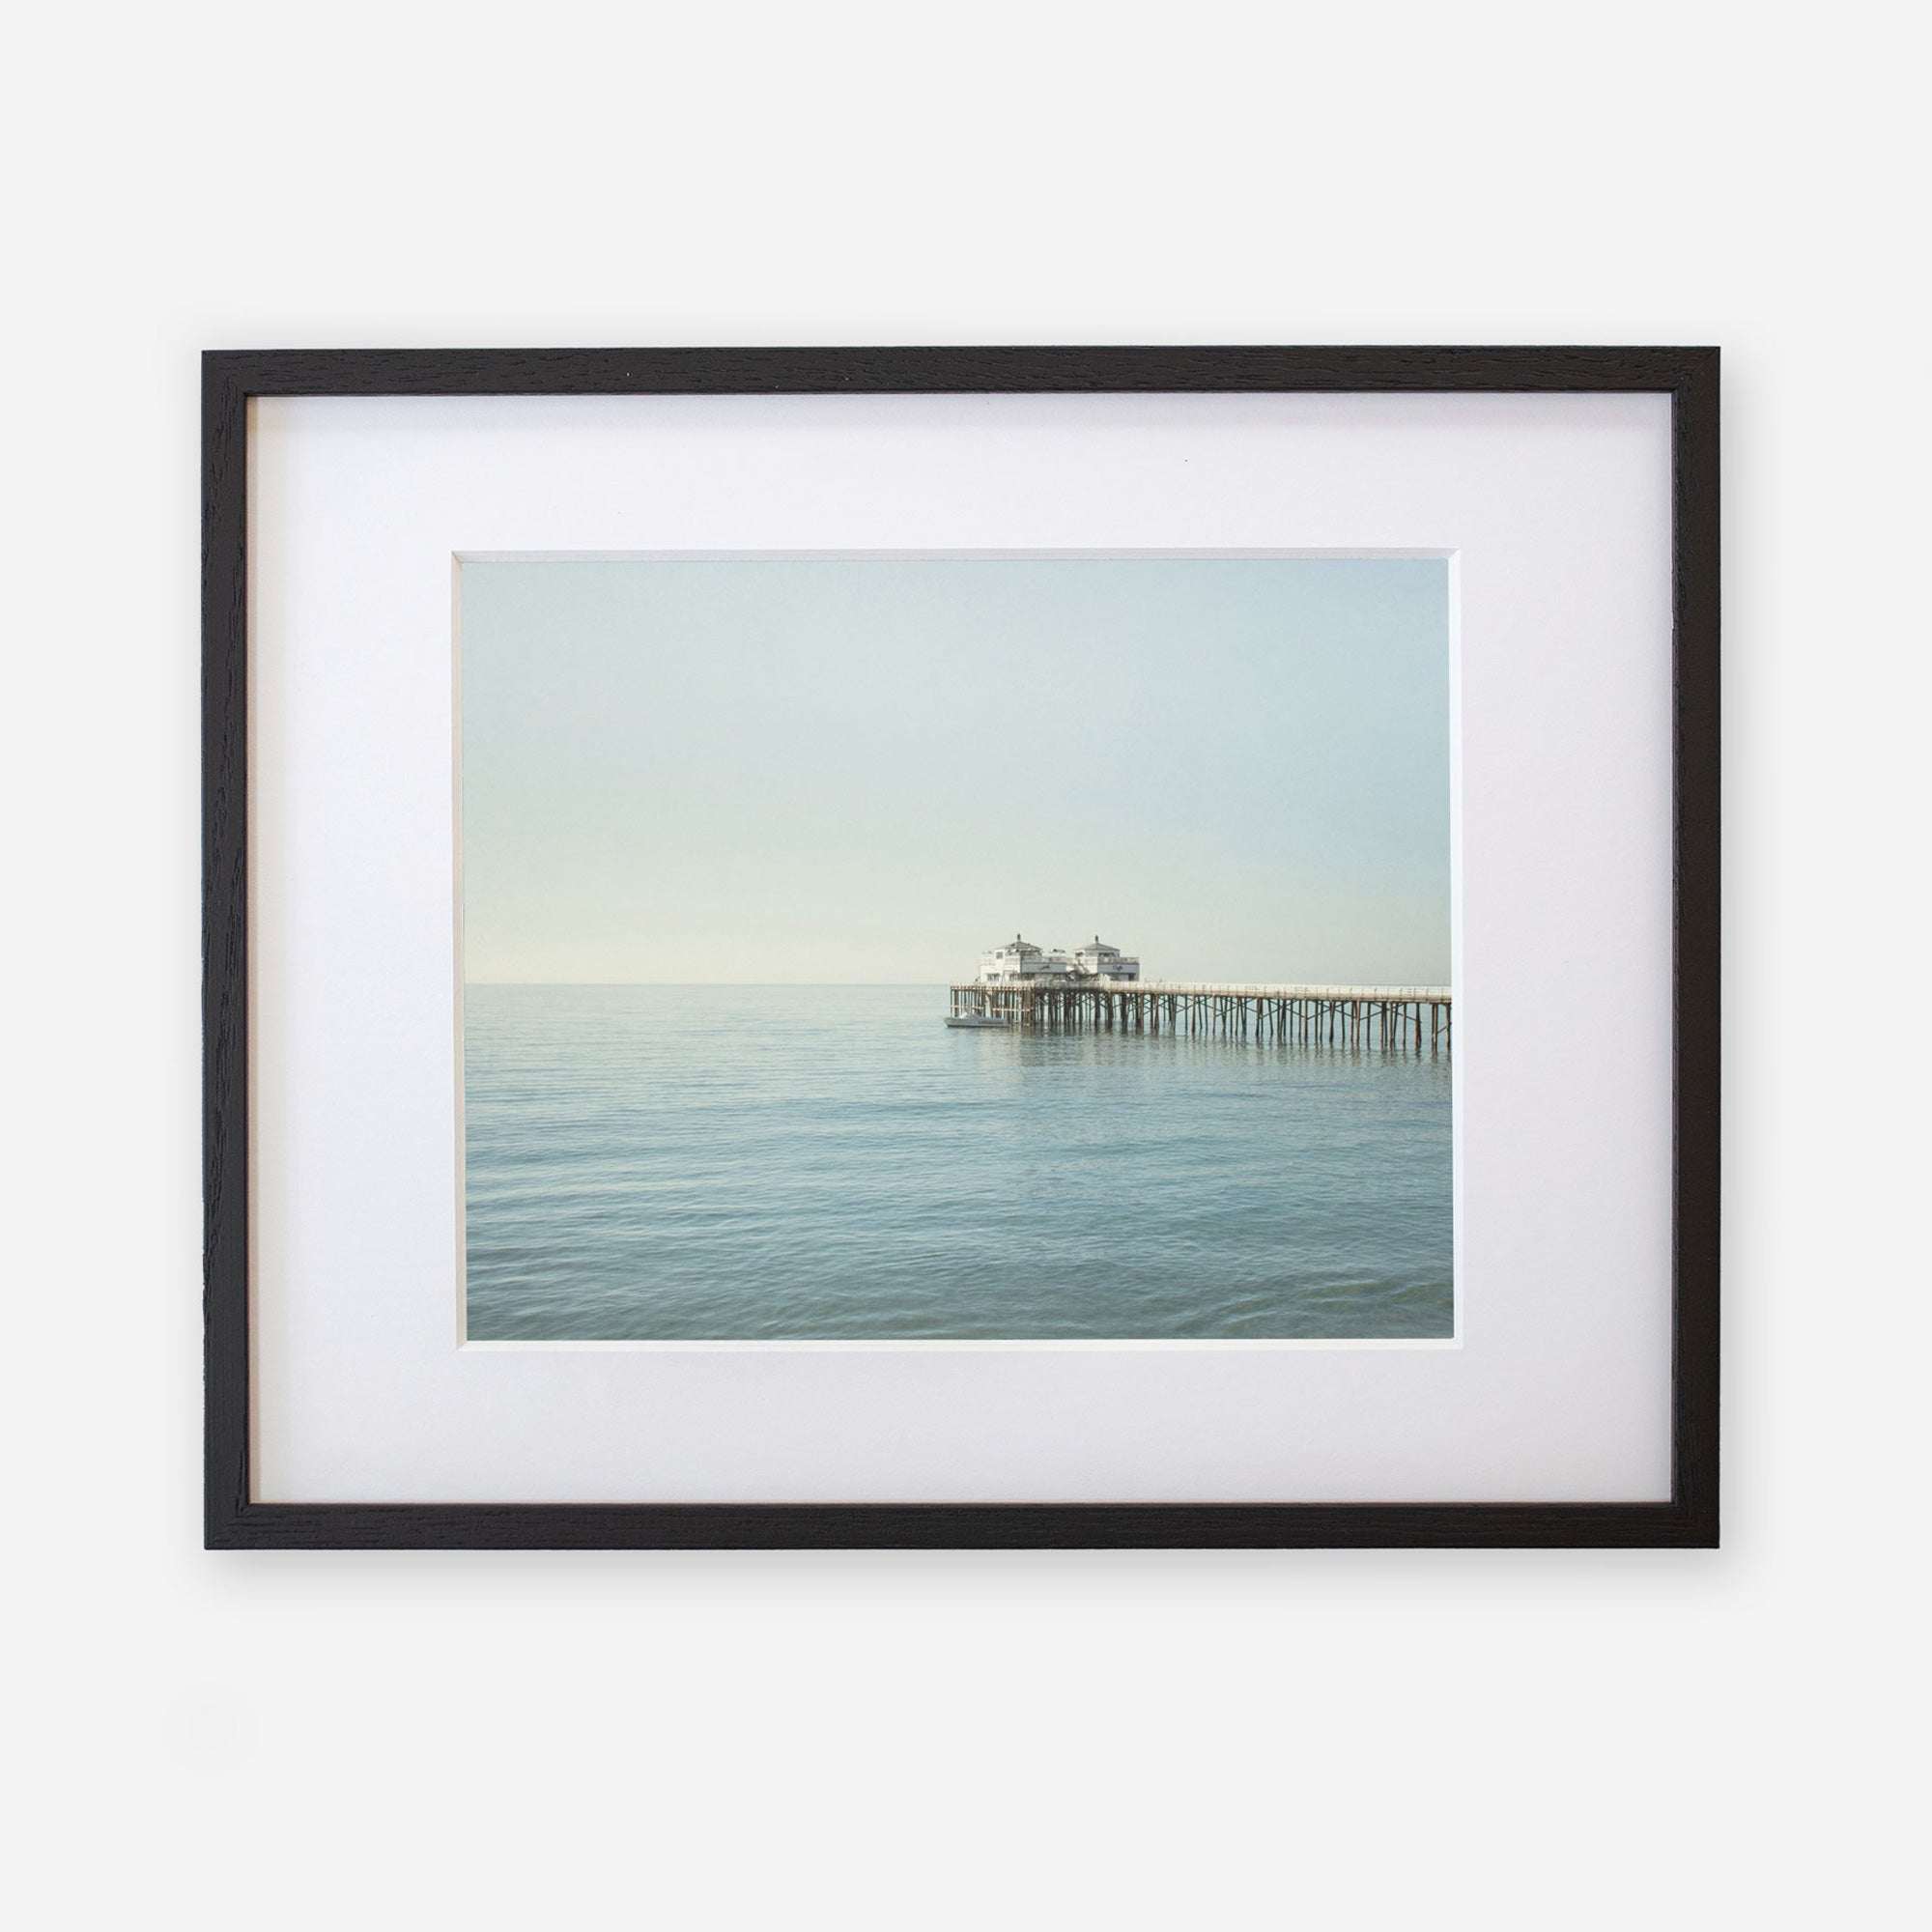 A framed photograph of a tranquil ocean scene featuring Malibu Pier extending into the water under a soft, misty sky. The frame is black with a white mat border, enhancing the image’s calm mood.
Product Name: Offley Green Coastal Print of Malibu Pier in California &#39;All Calm in Malibu&#39;